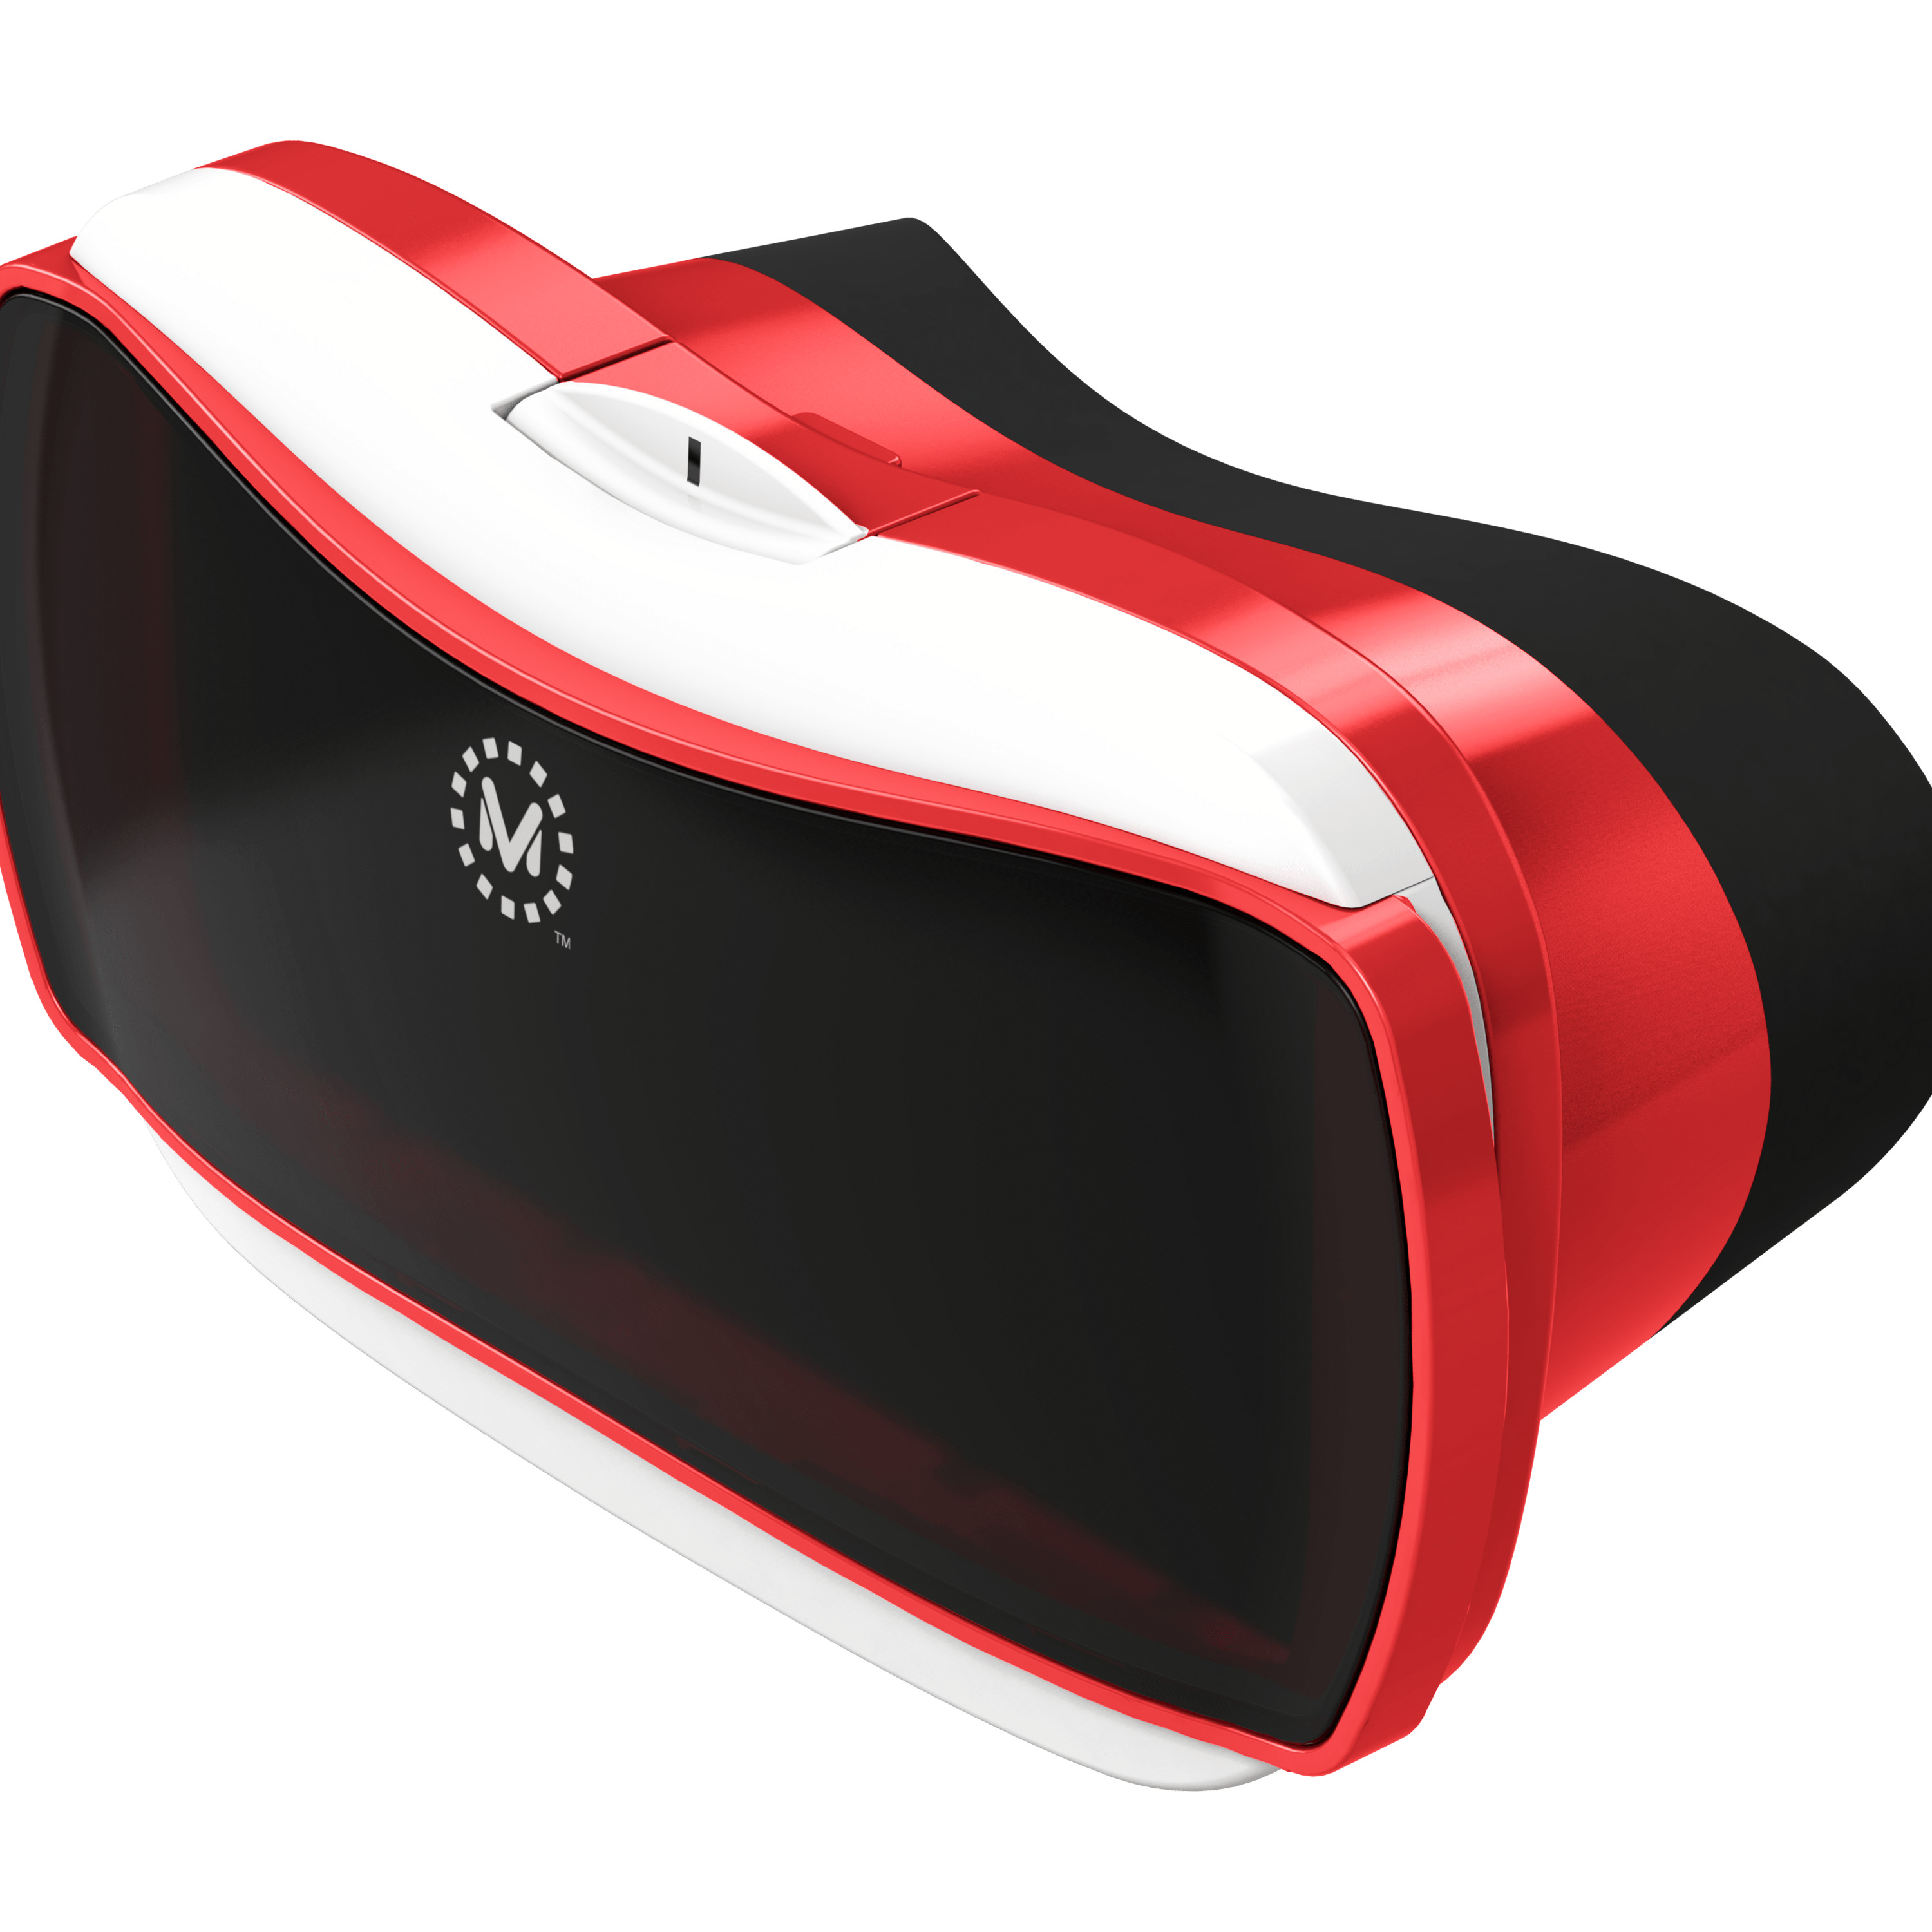 Viewmaster VR Headset icons